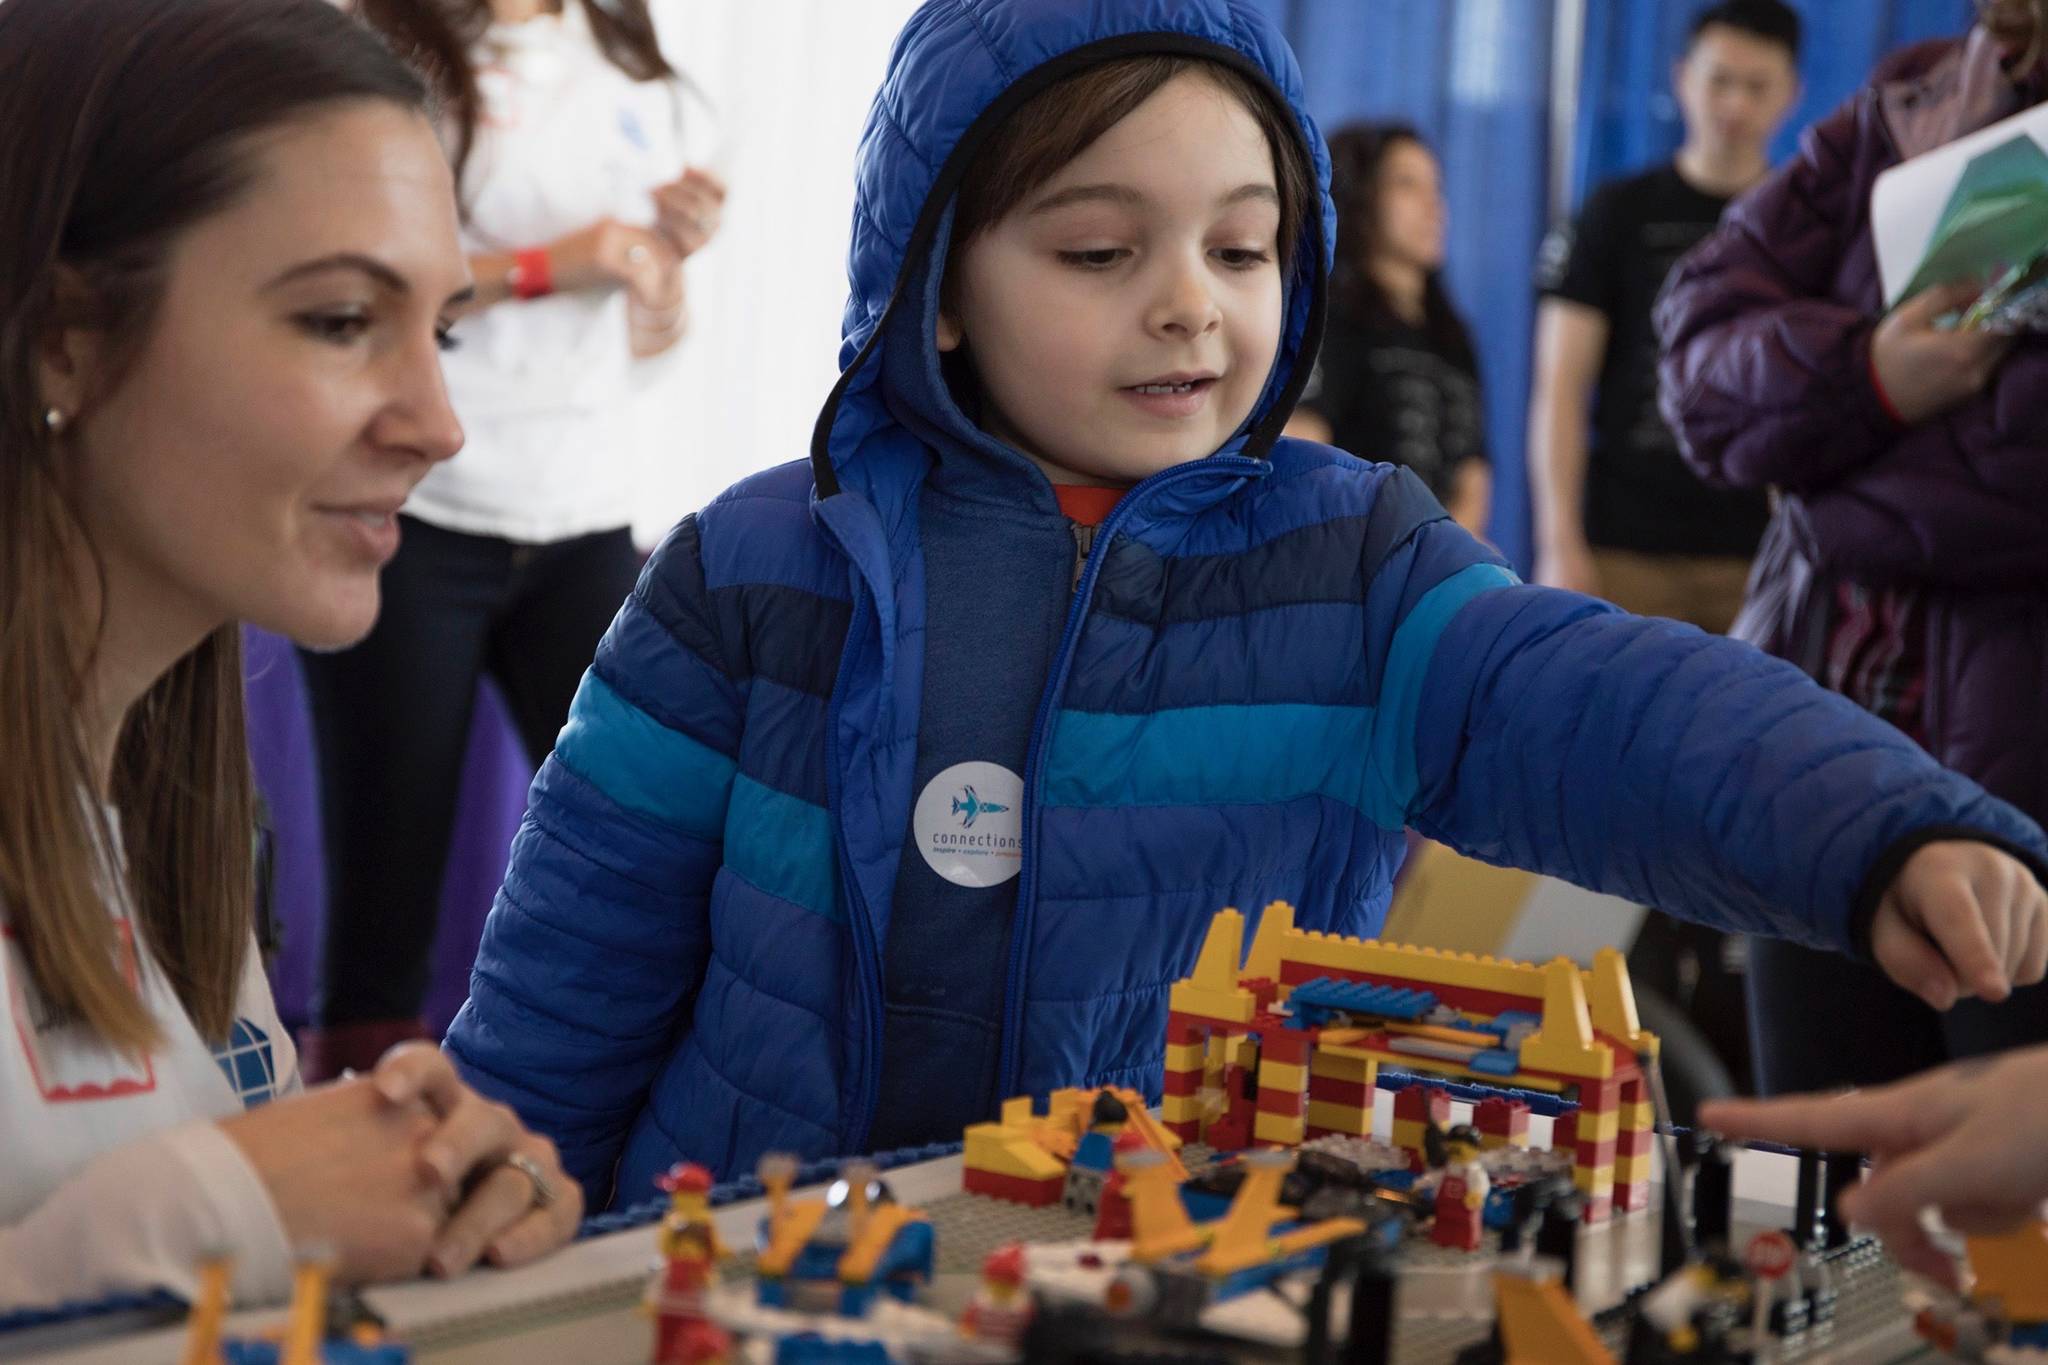 All ages enjoyed the 2018 Engineering Fair. COURTESY PHOTO, Ted Huetter/The Museum of Flight